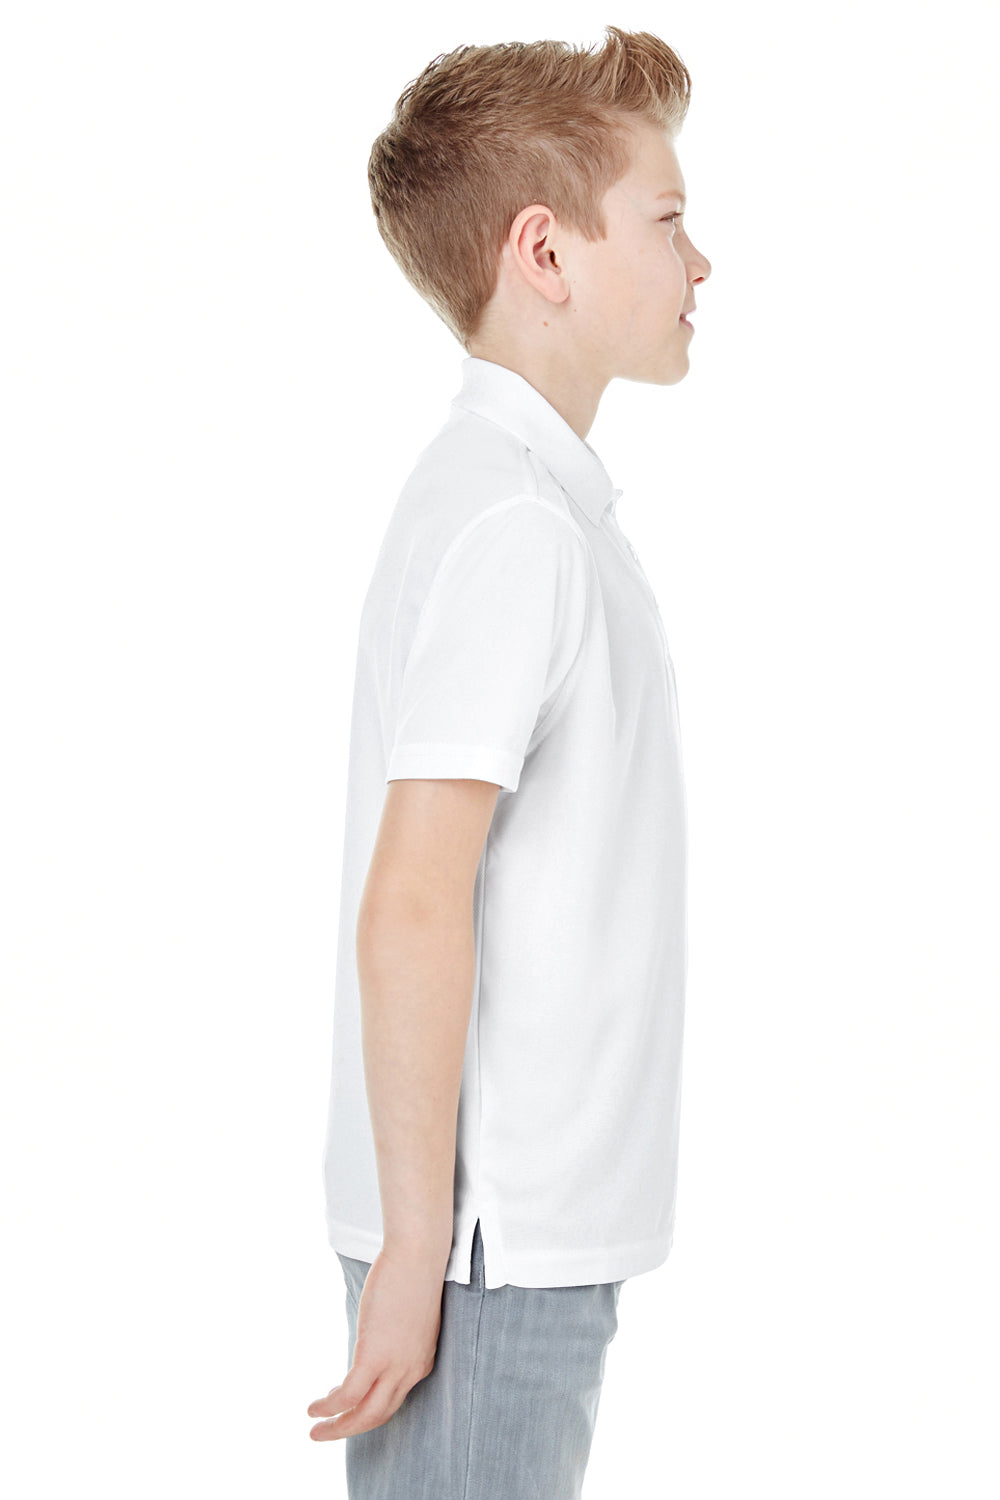 UltraClub 8210Y Youth Cool & Dry Moisture Wicking Short Sleeve Polo Shirt White Side